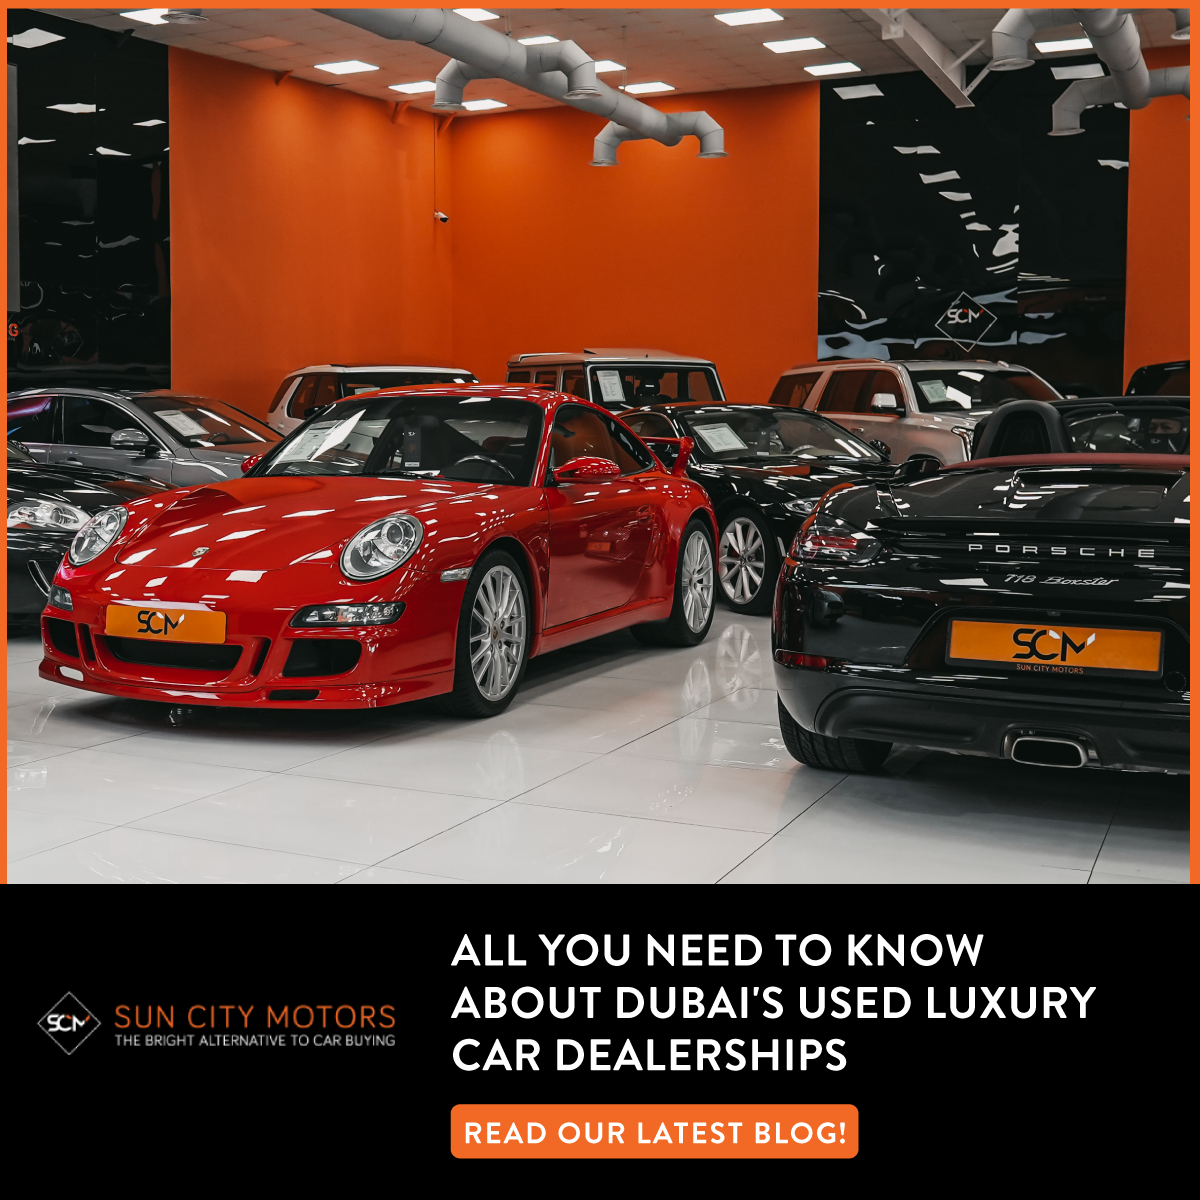 All You Need to Know About Dubai’s Used Luxury Car Dealerships